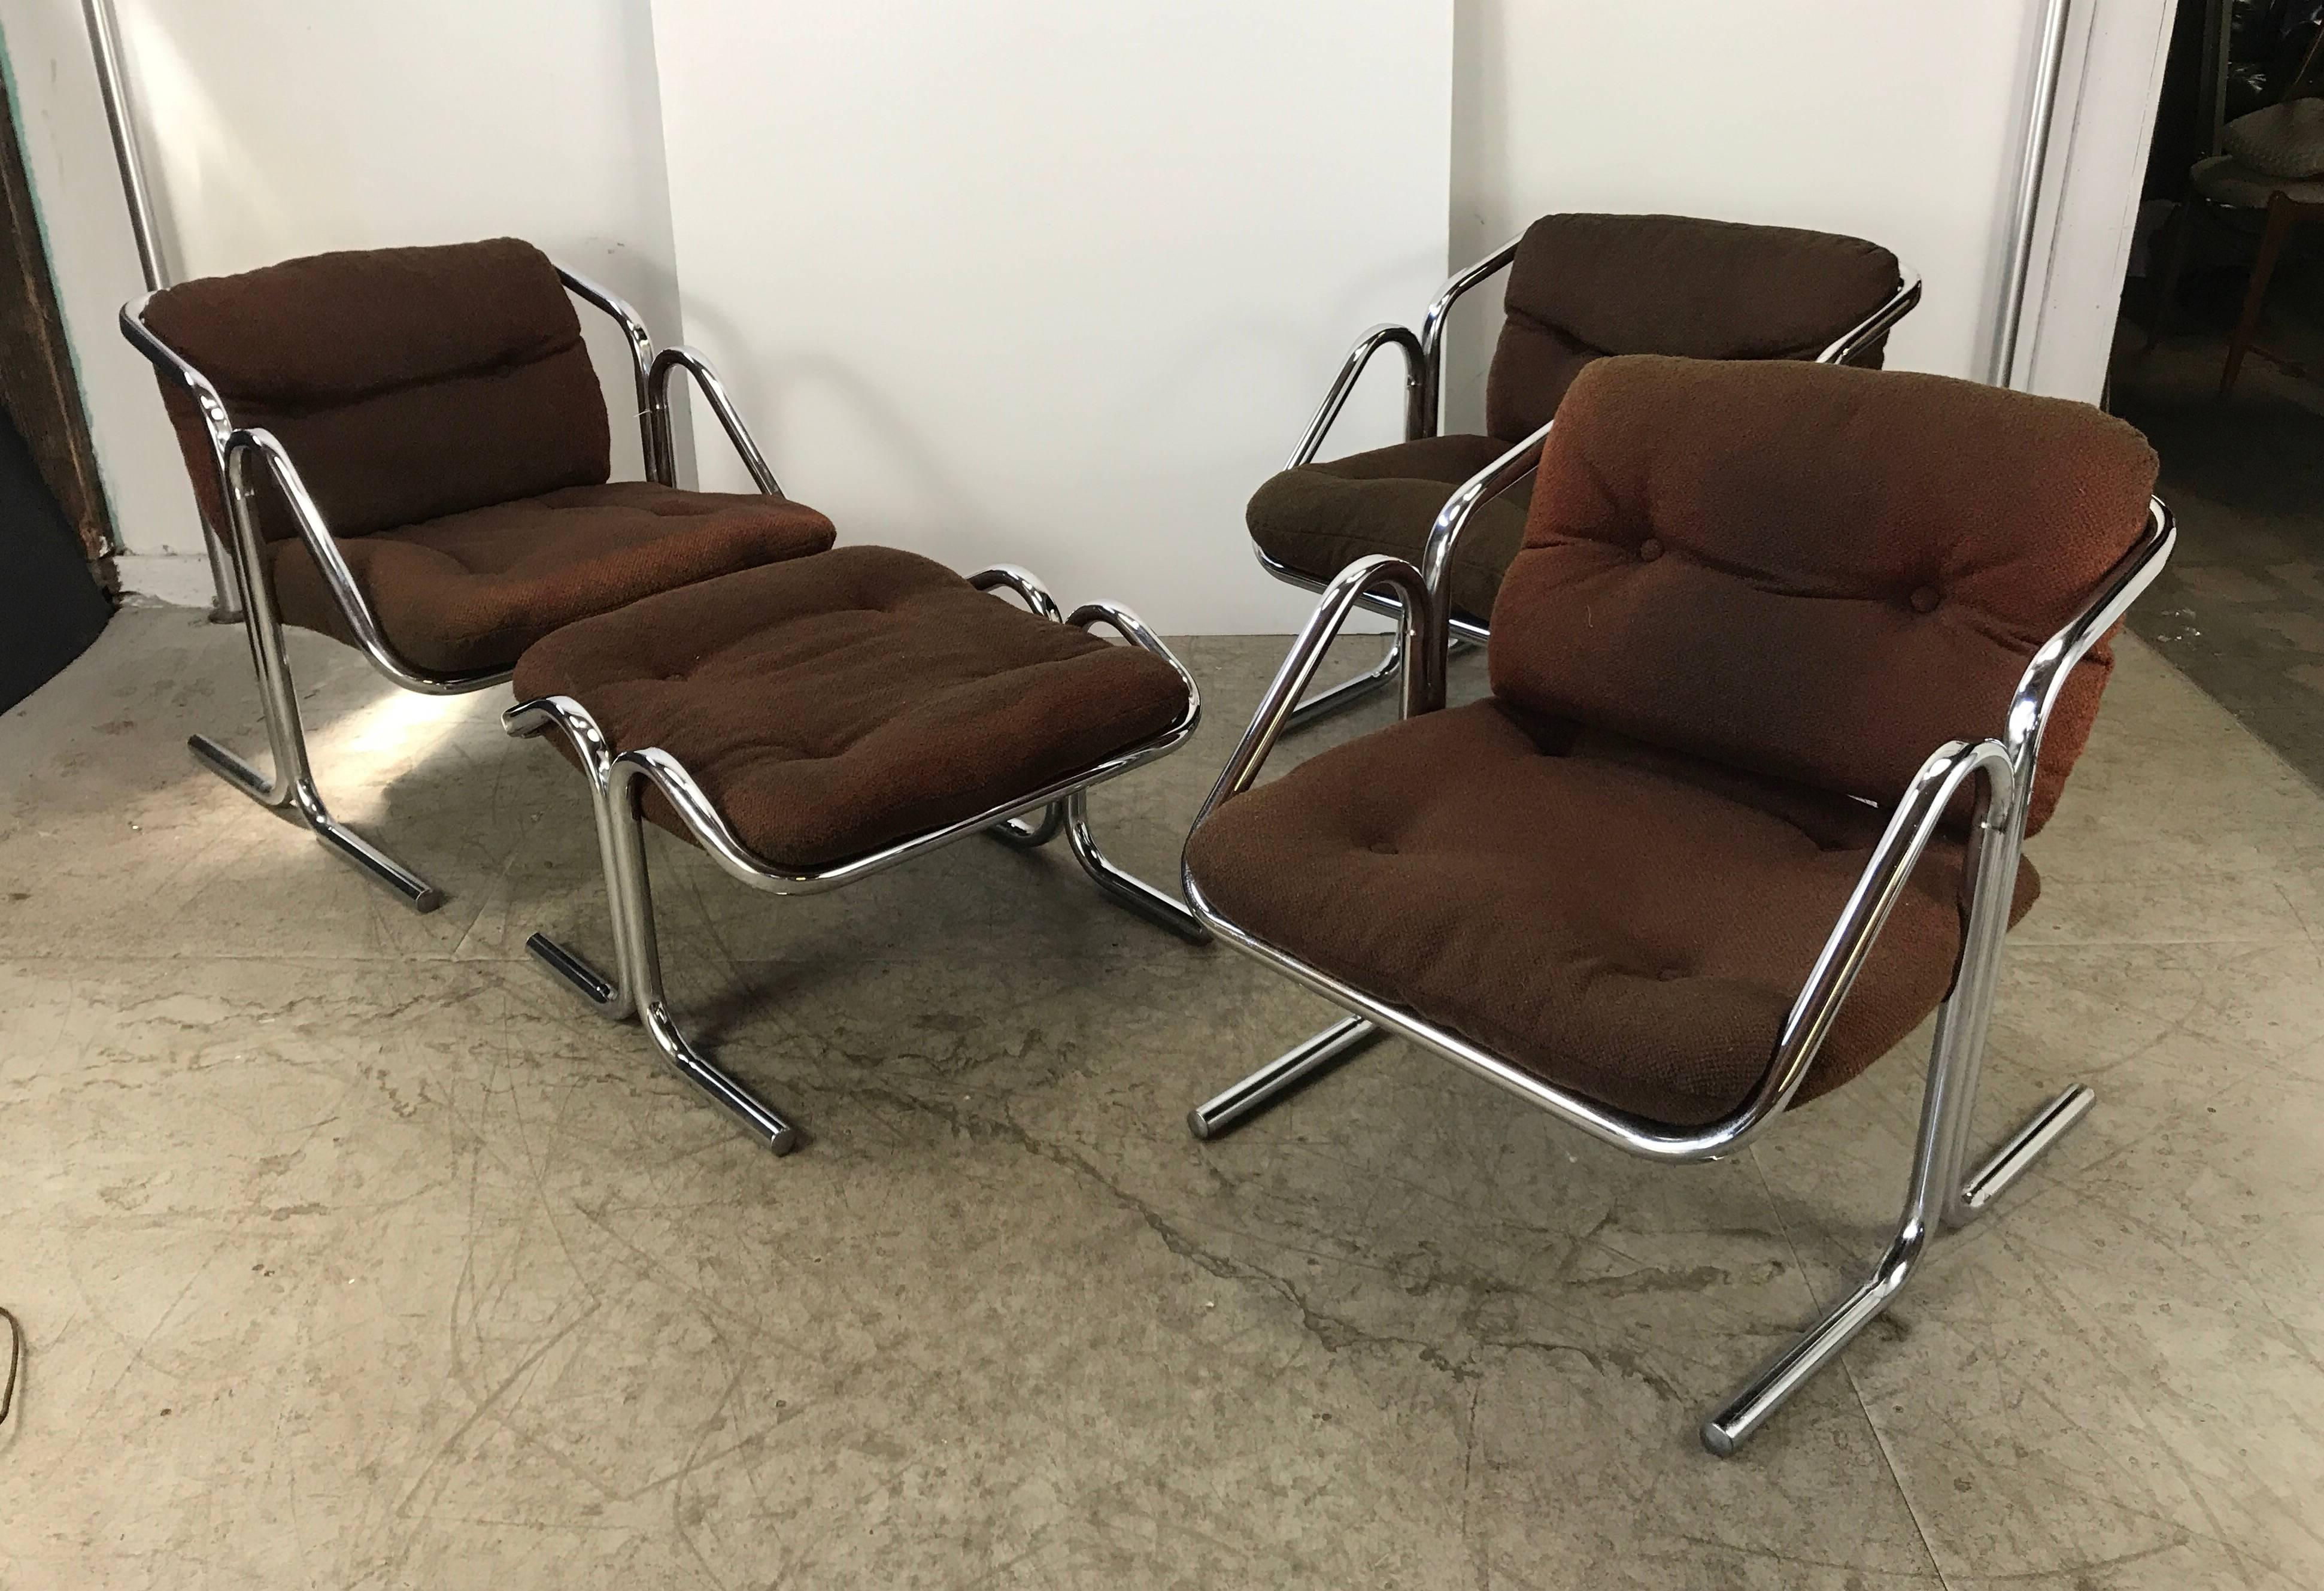 American Set of Three Chairs and Ottoman by Jerry Johnson, Modernist Chrome/Canvas/Wool